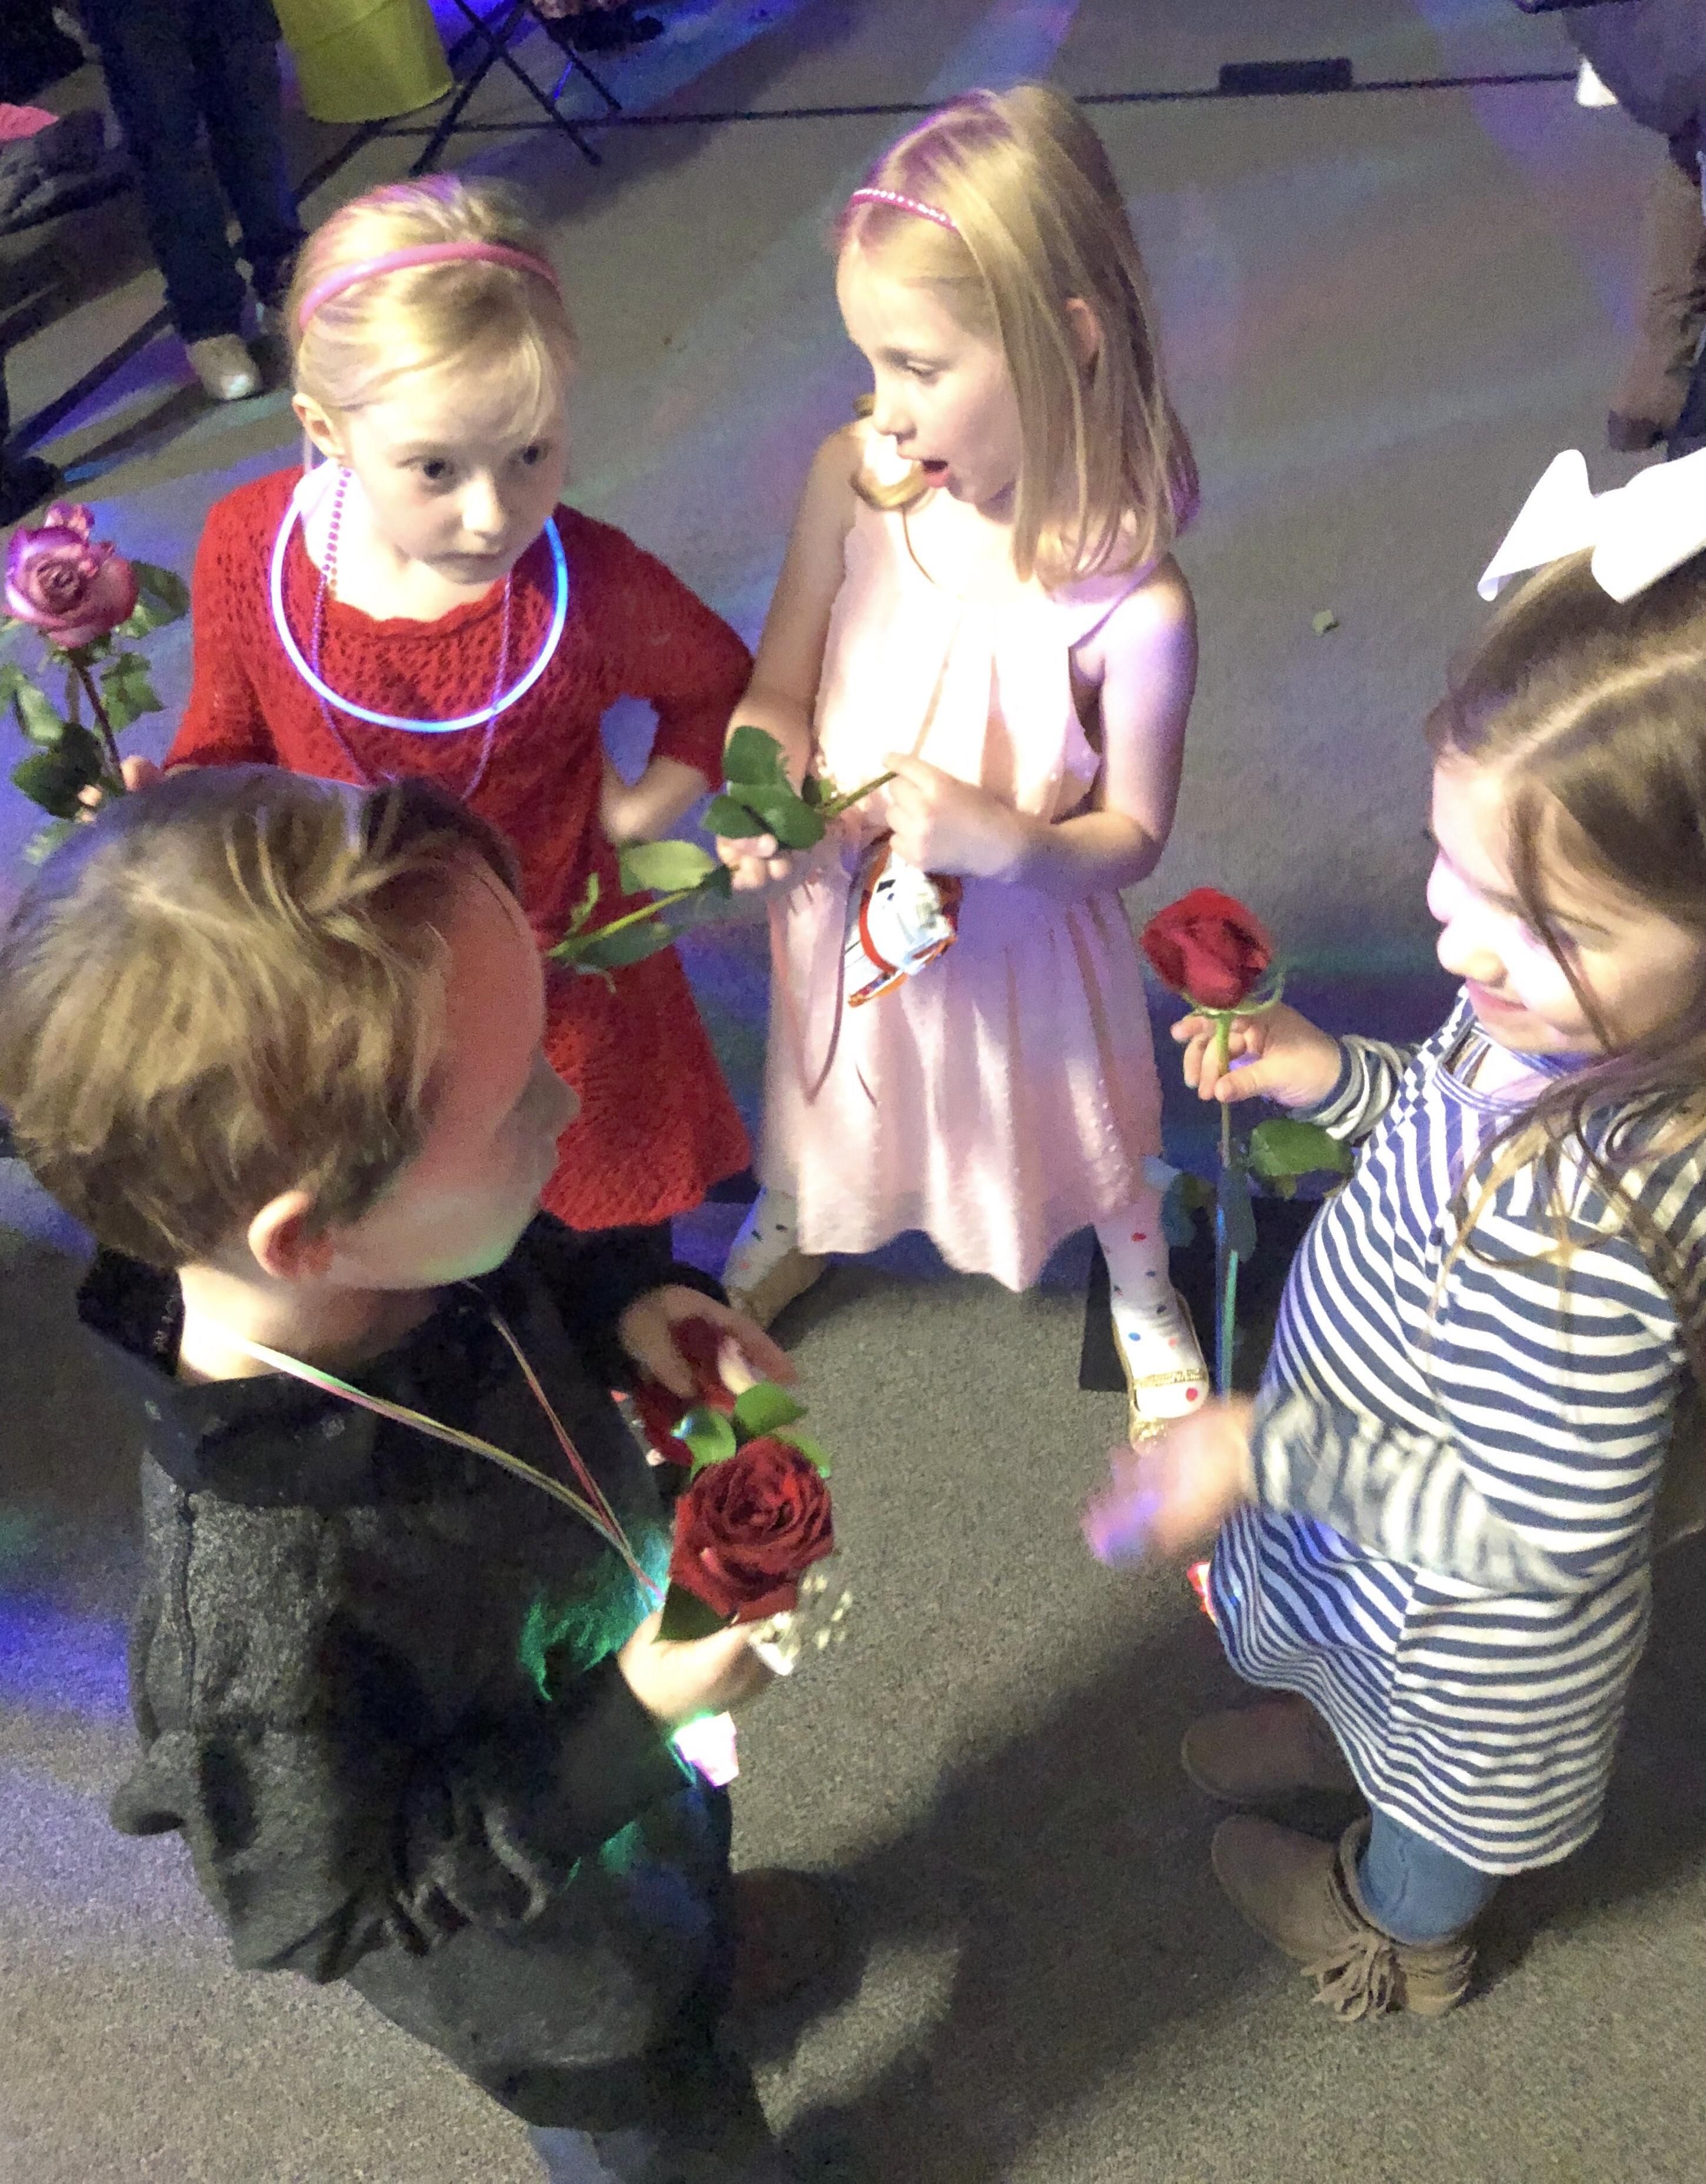 My 6 year old son had his first school dance tonight. Got caught giving roses to different girls.